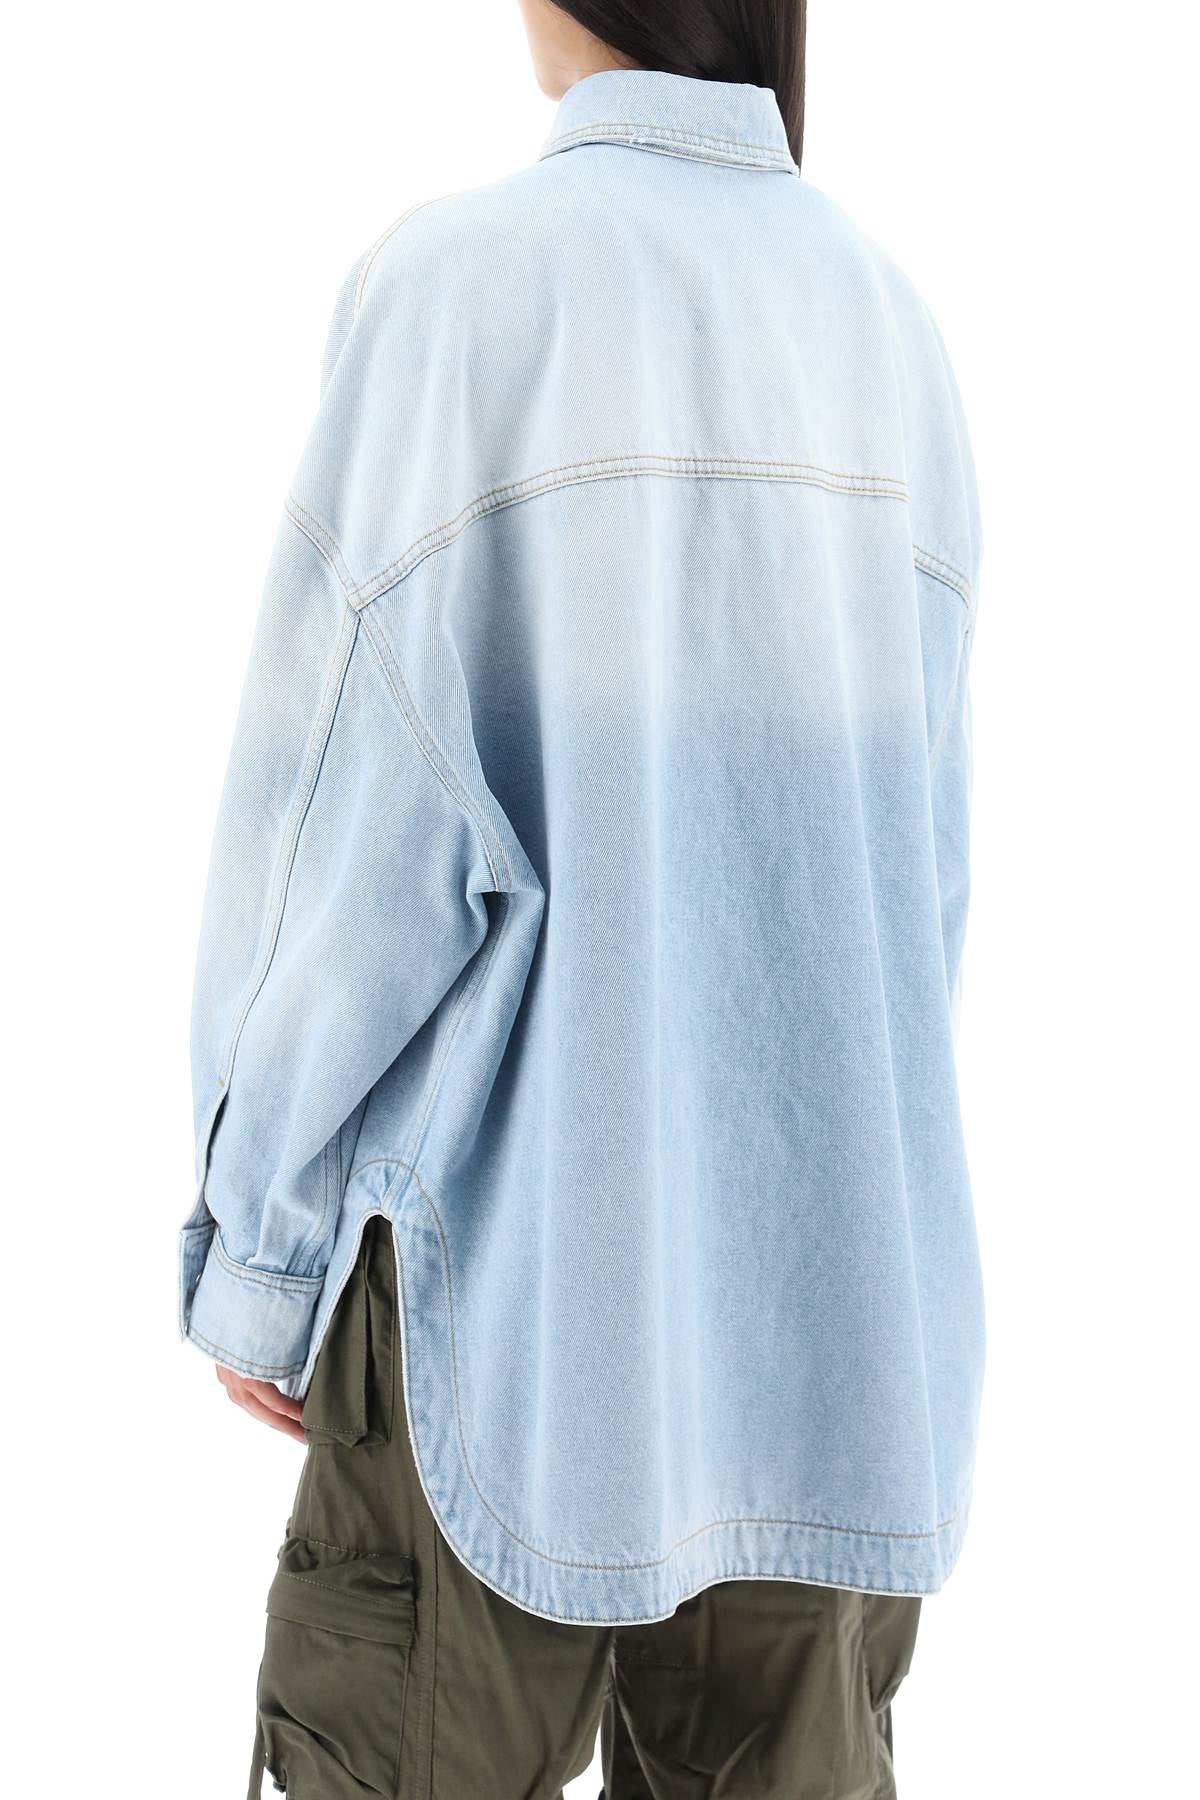 THE ATTICO Stylish Light Blue Denim Outerwear for Women - FW23 Collection